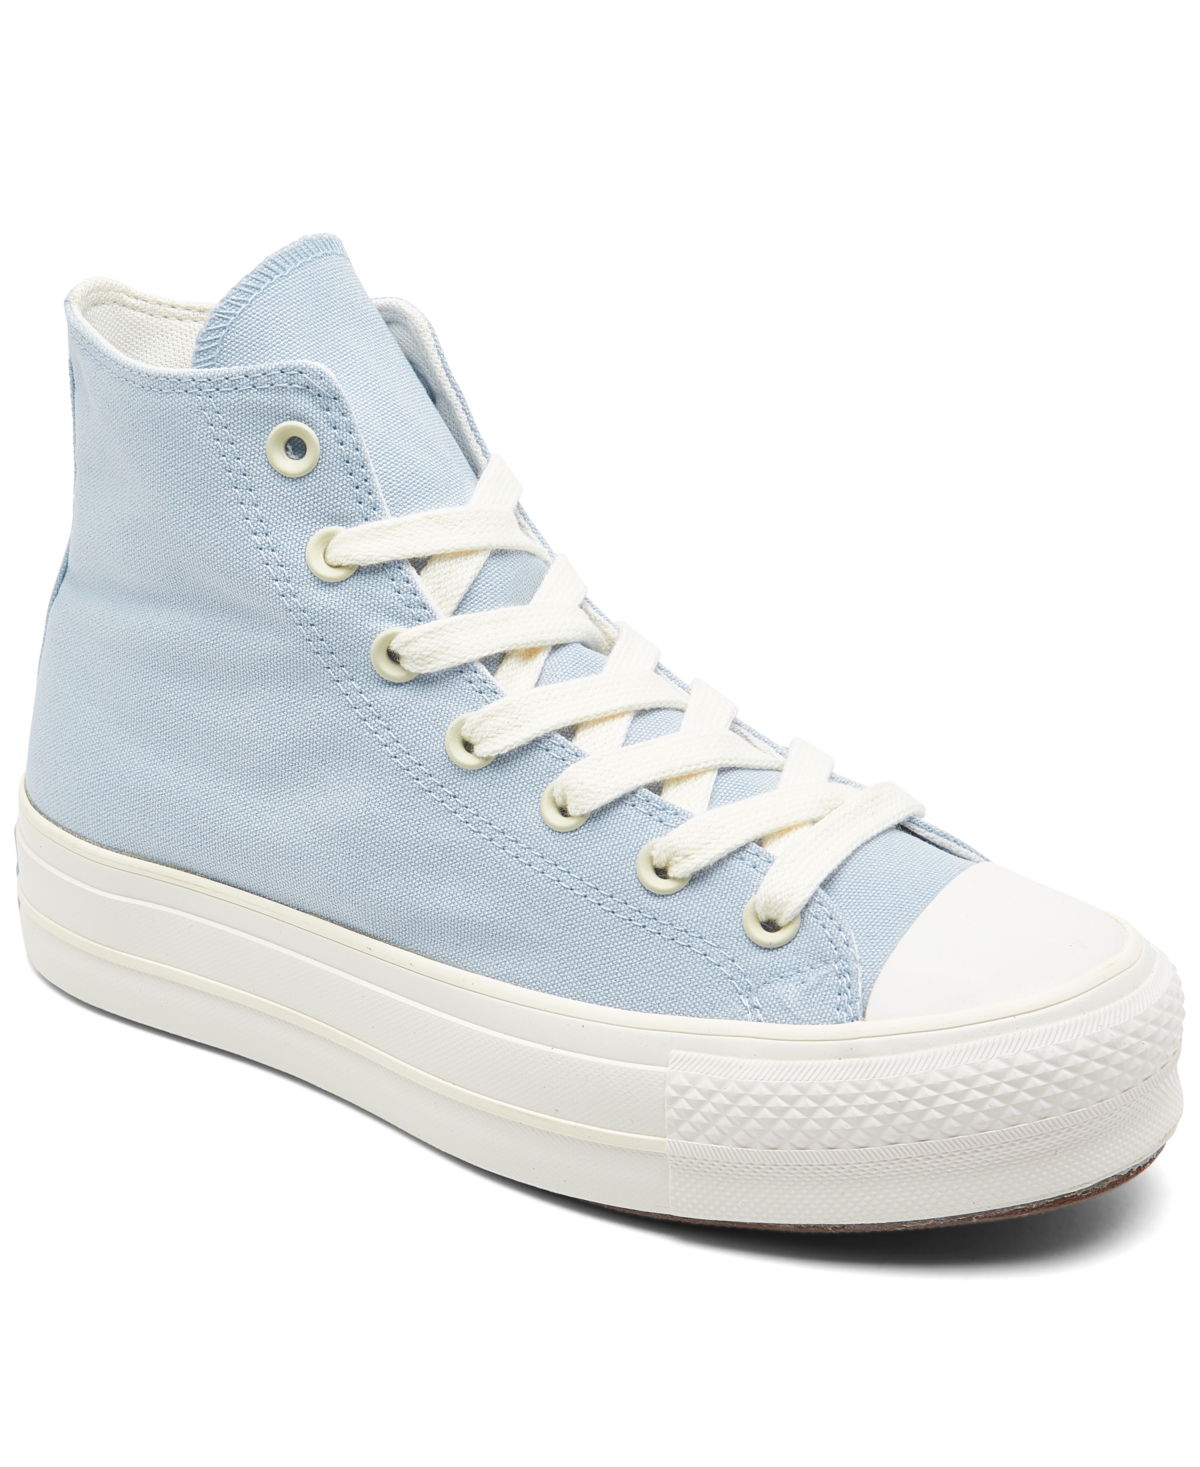 Women's Chuck Taylor All Star Lift Platform High Top Casual Sneakers from Finish Line - Cloudy Daze, Egret